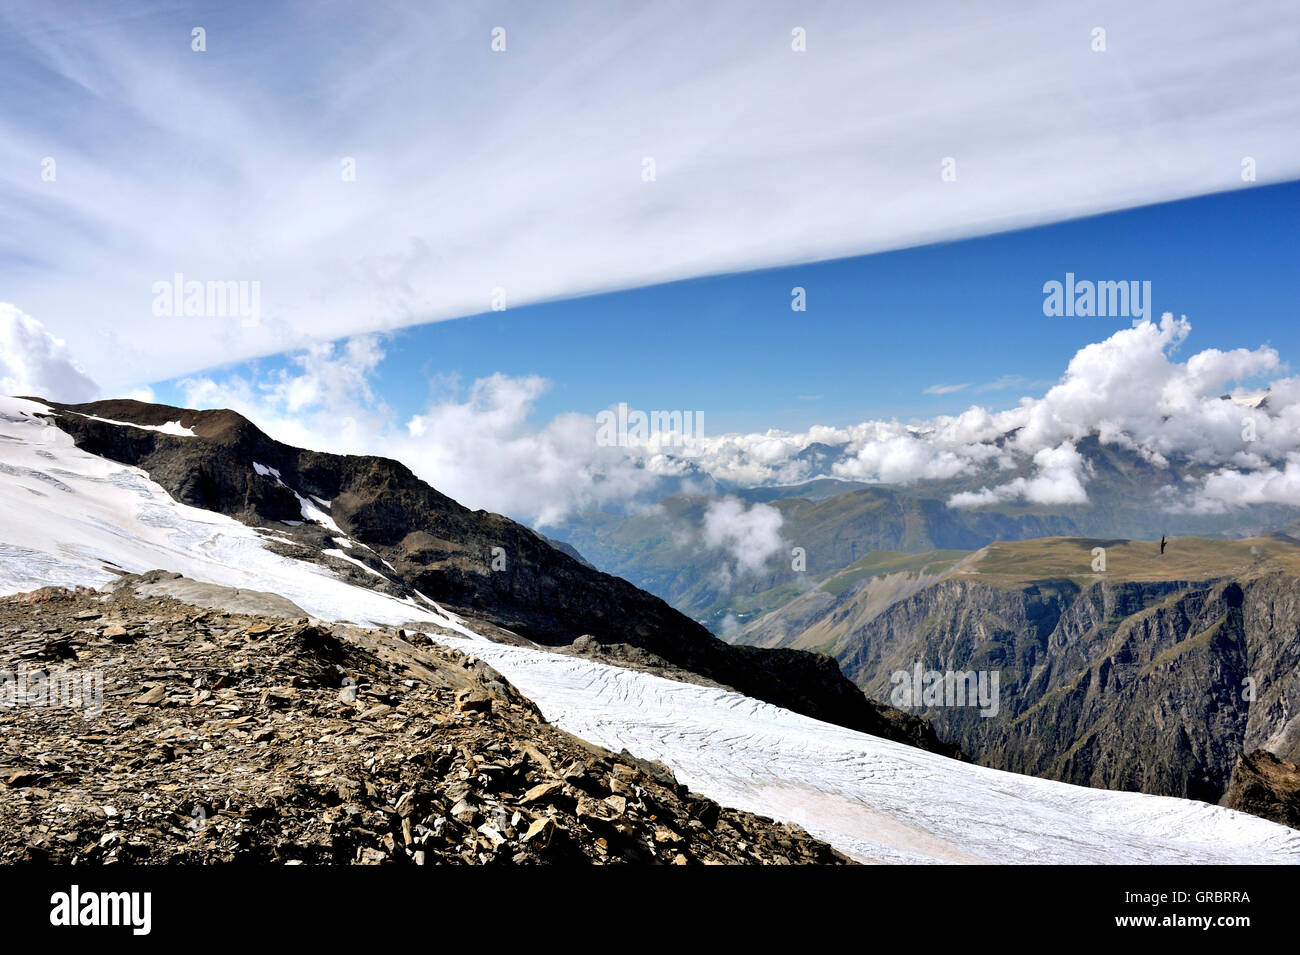 Panorama View Of The Moutain Plateau Emparis With Atmospheric Layers, Cirrostratus Clouds, France Stock Photo